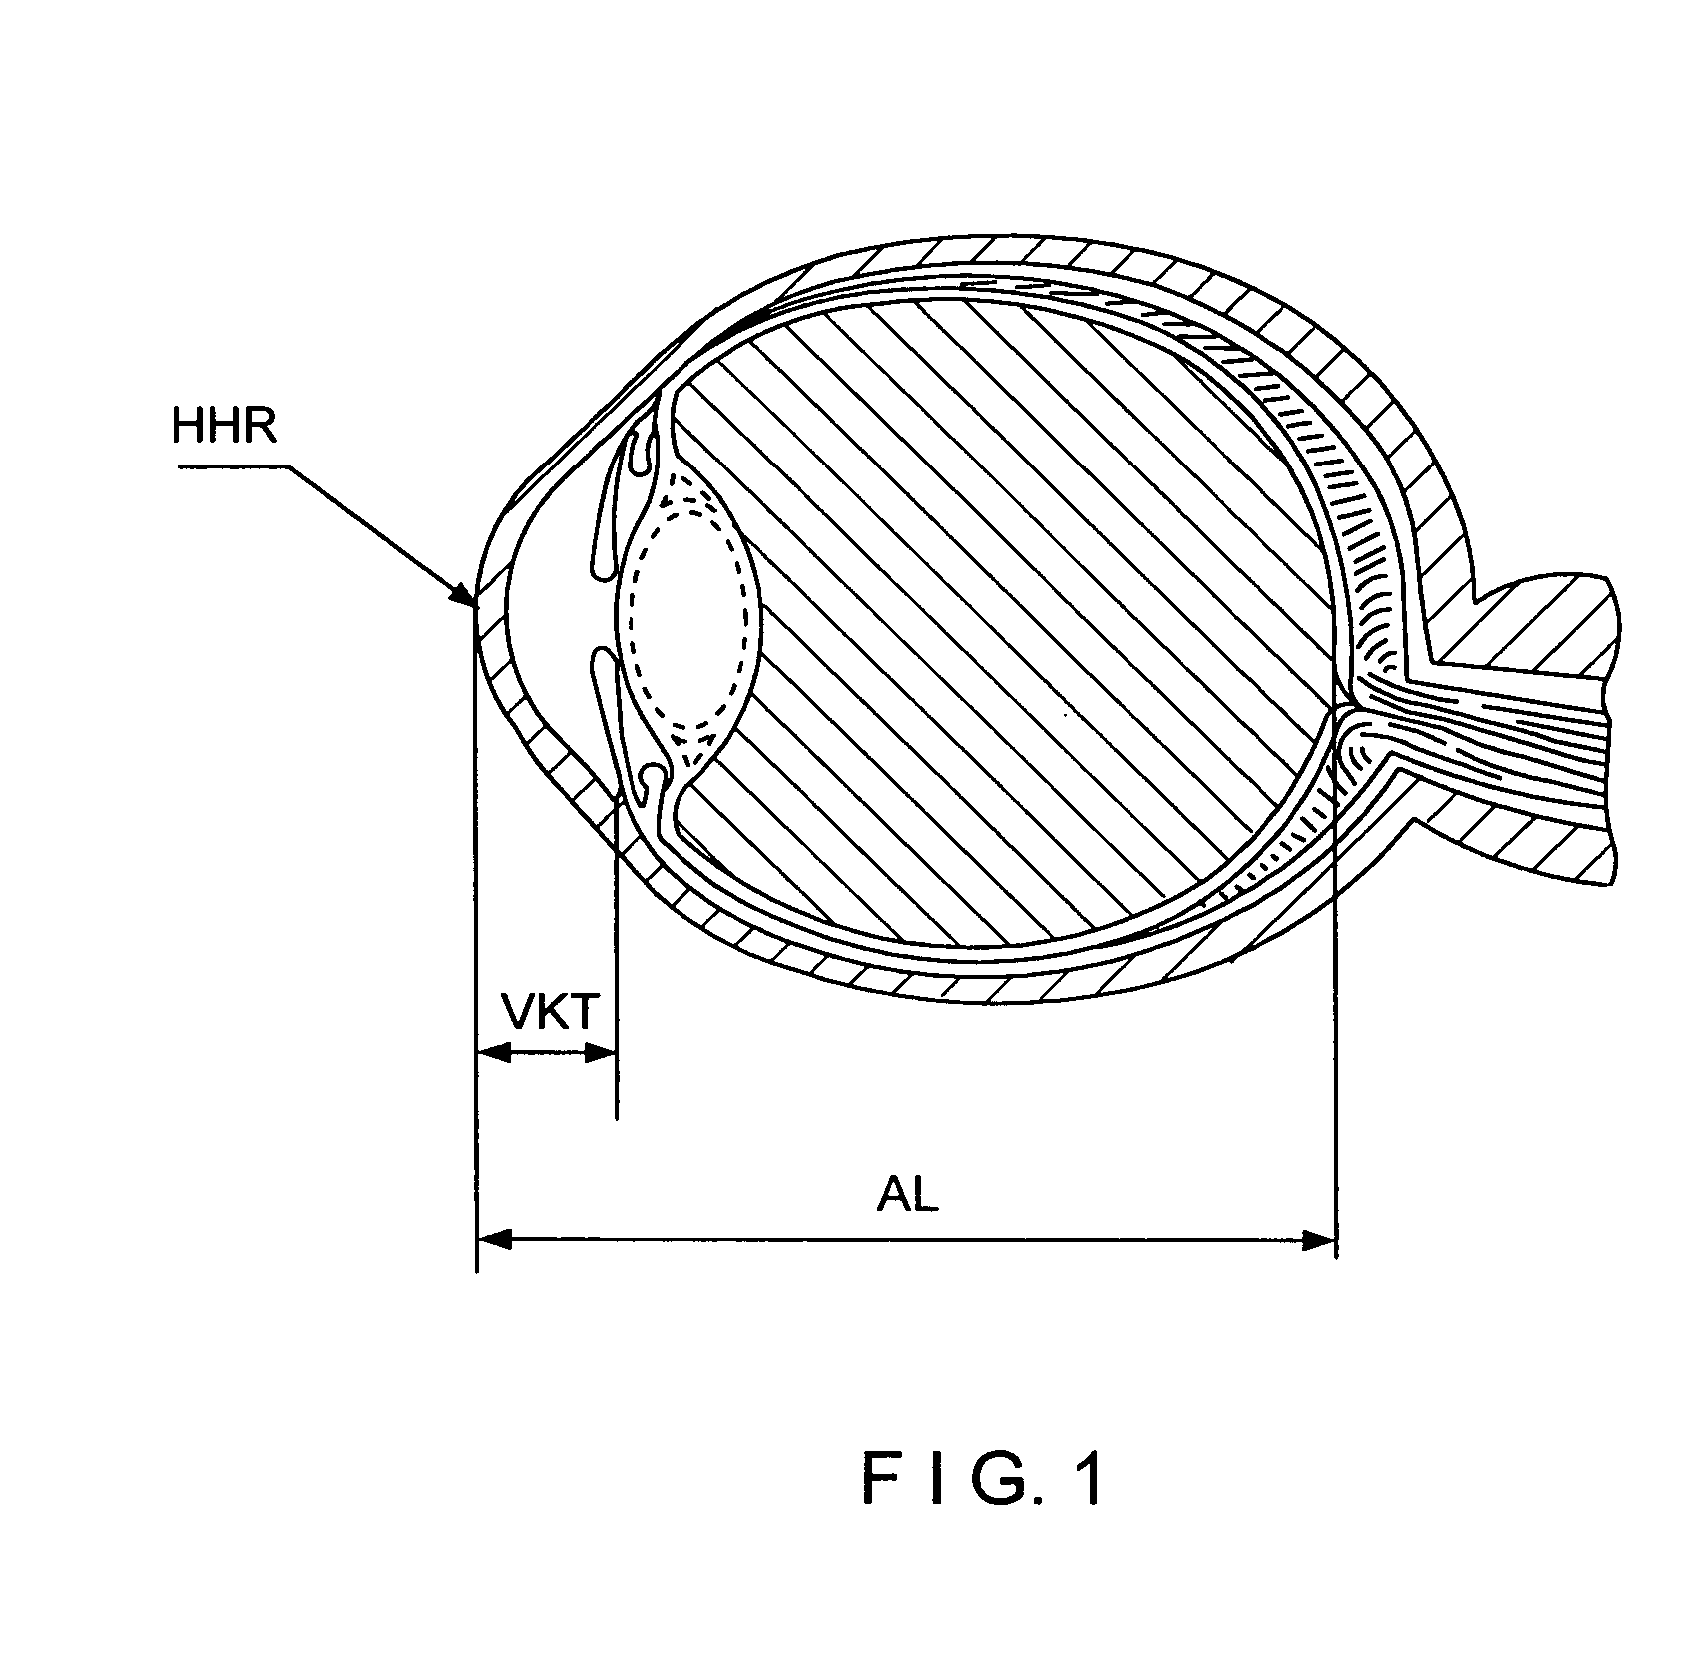 System and method for the non-contacting measurement of the axis length and/or cornea curvature and/or anterior chamber depth of the eye, preferably for intraocular lens calculation